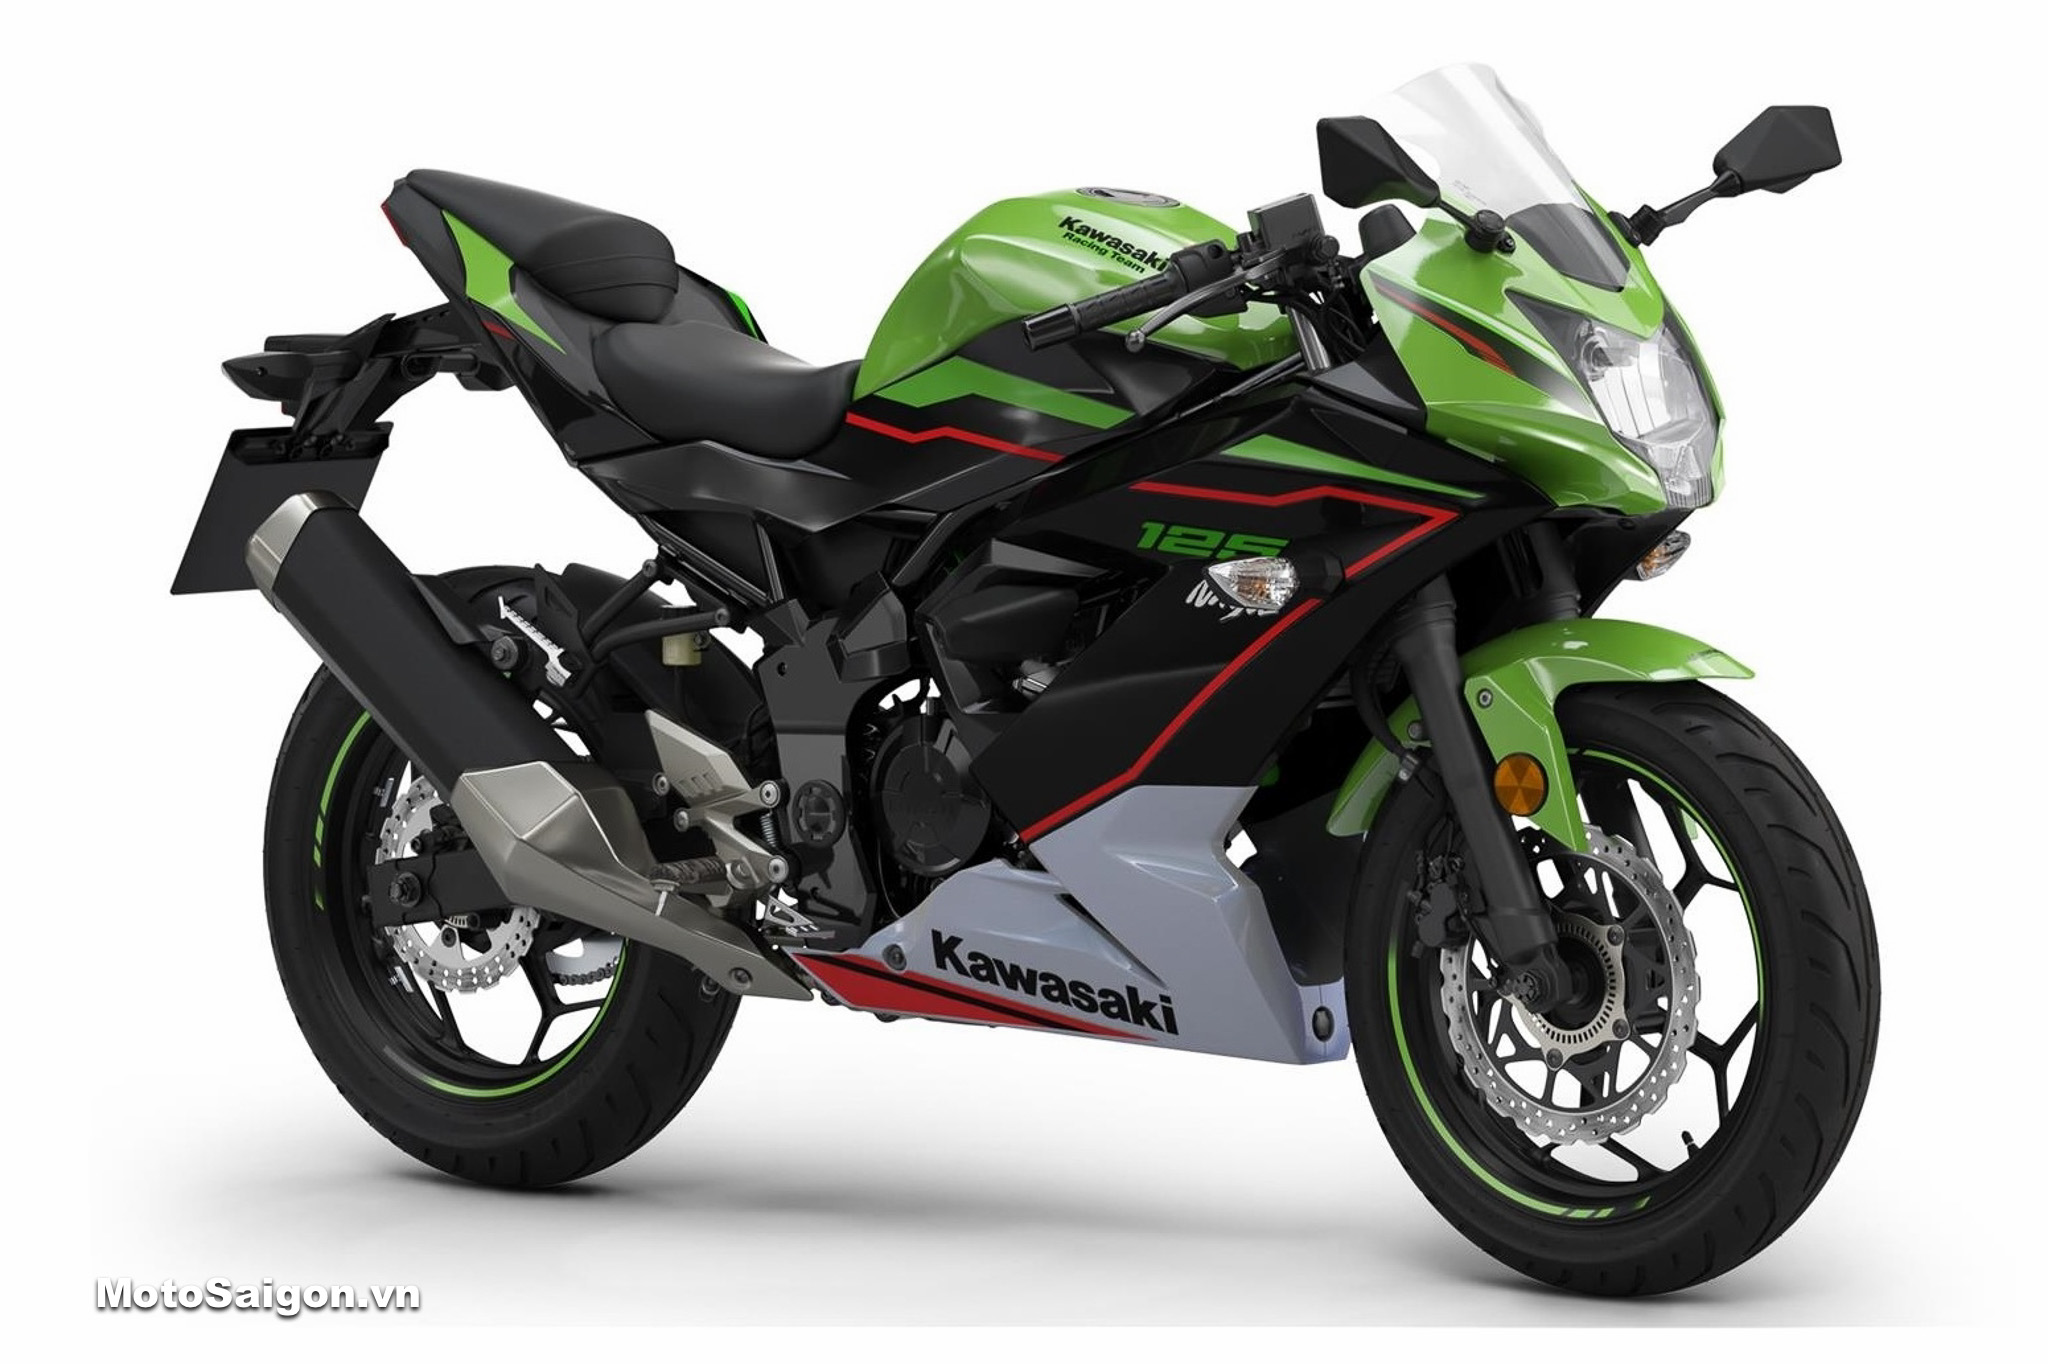 Maxaboutcom  2015 Kawasaki Ninja RR ZX150  Powerful  Sporty BUT not  coming to India Complete Specifications of Ninja 150 RR   httpautosmaxaboutcombikeskawasakininjaninjakrrzx150  Facebook